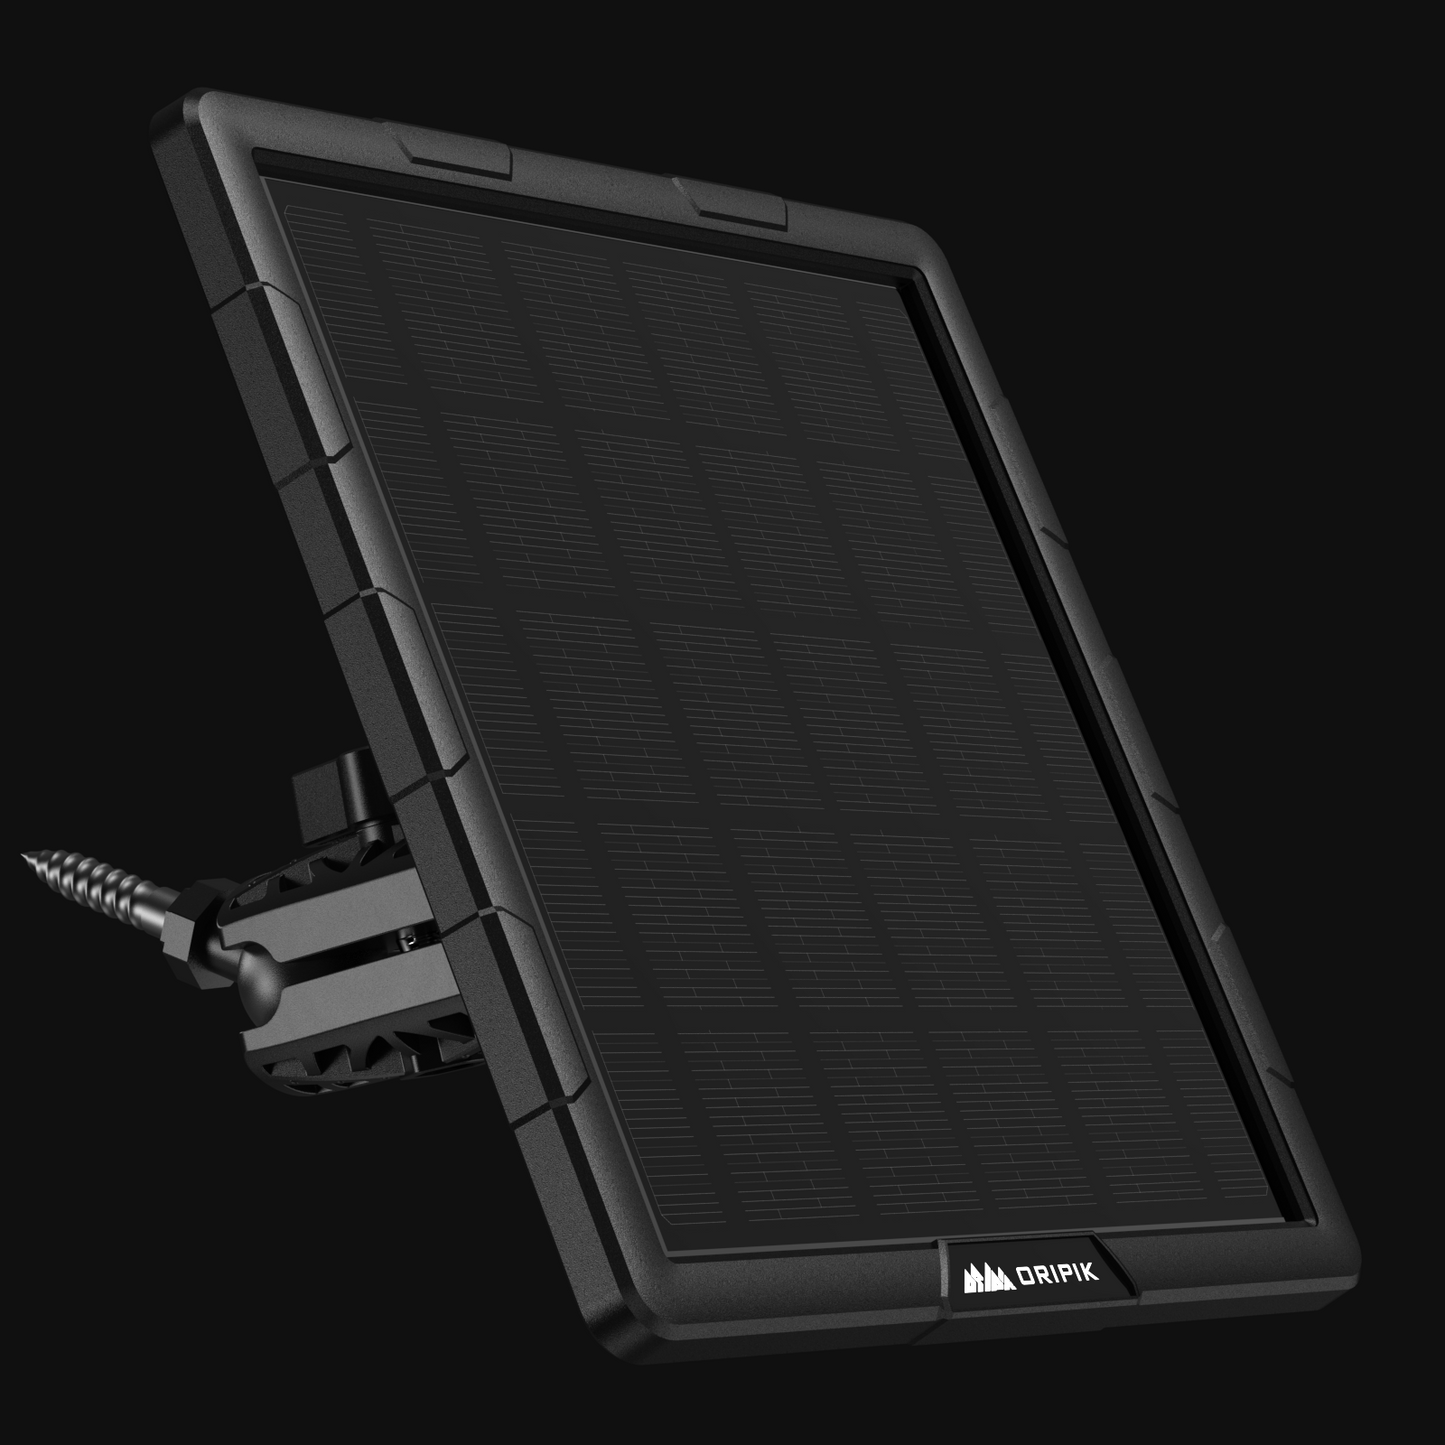 5W 6000mAh Solar Lithium Battery Charger